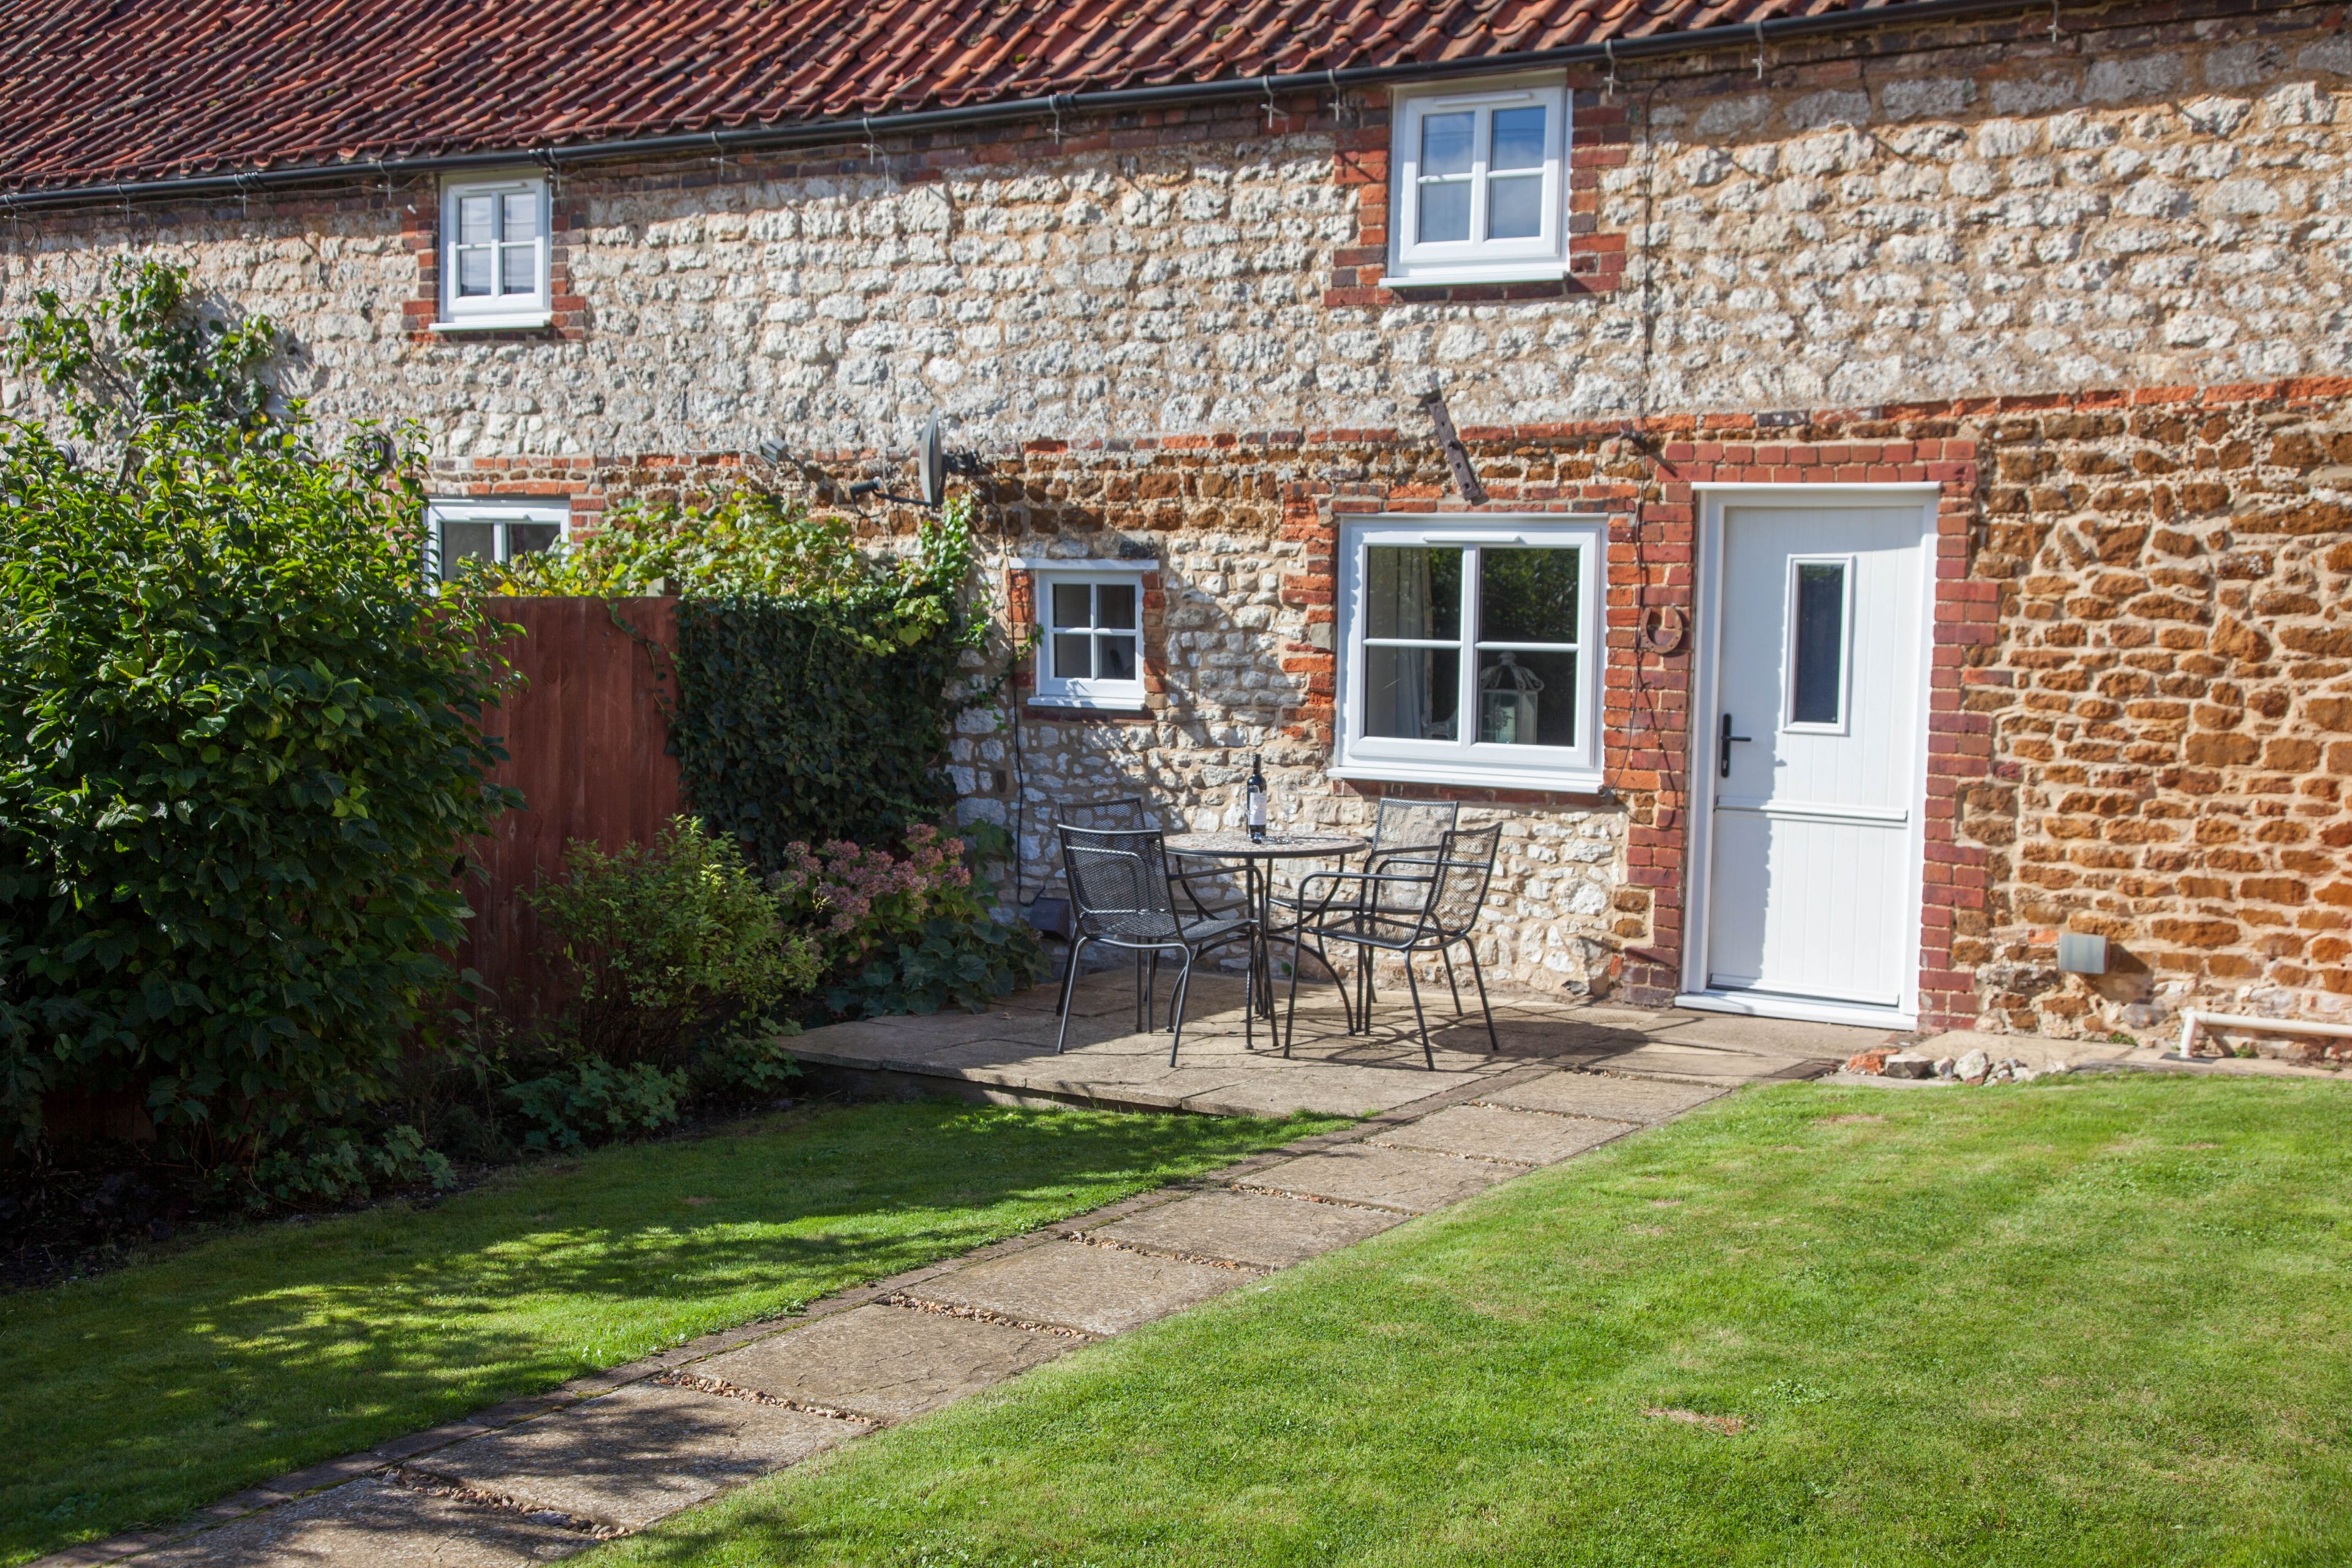 Details about a cottage Holiday at Woodpecker Cottage